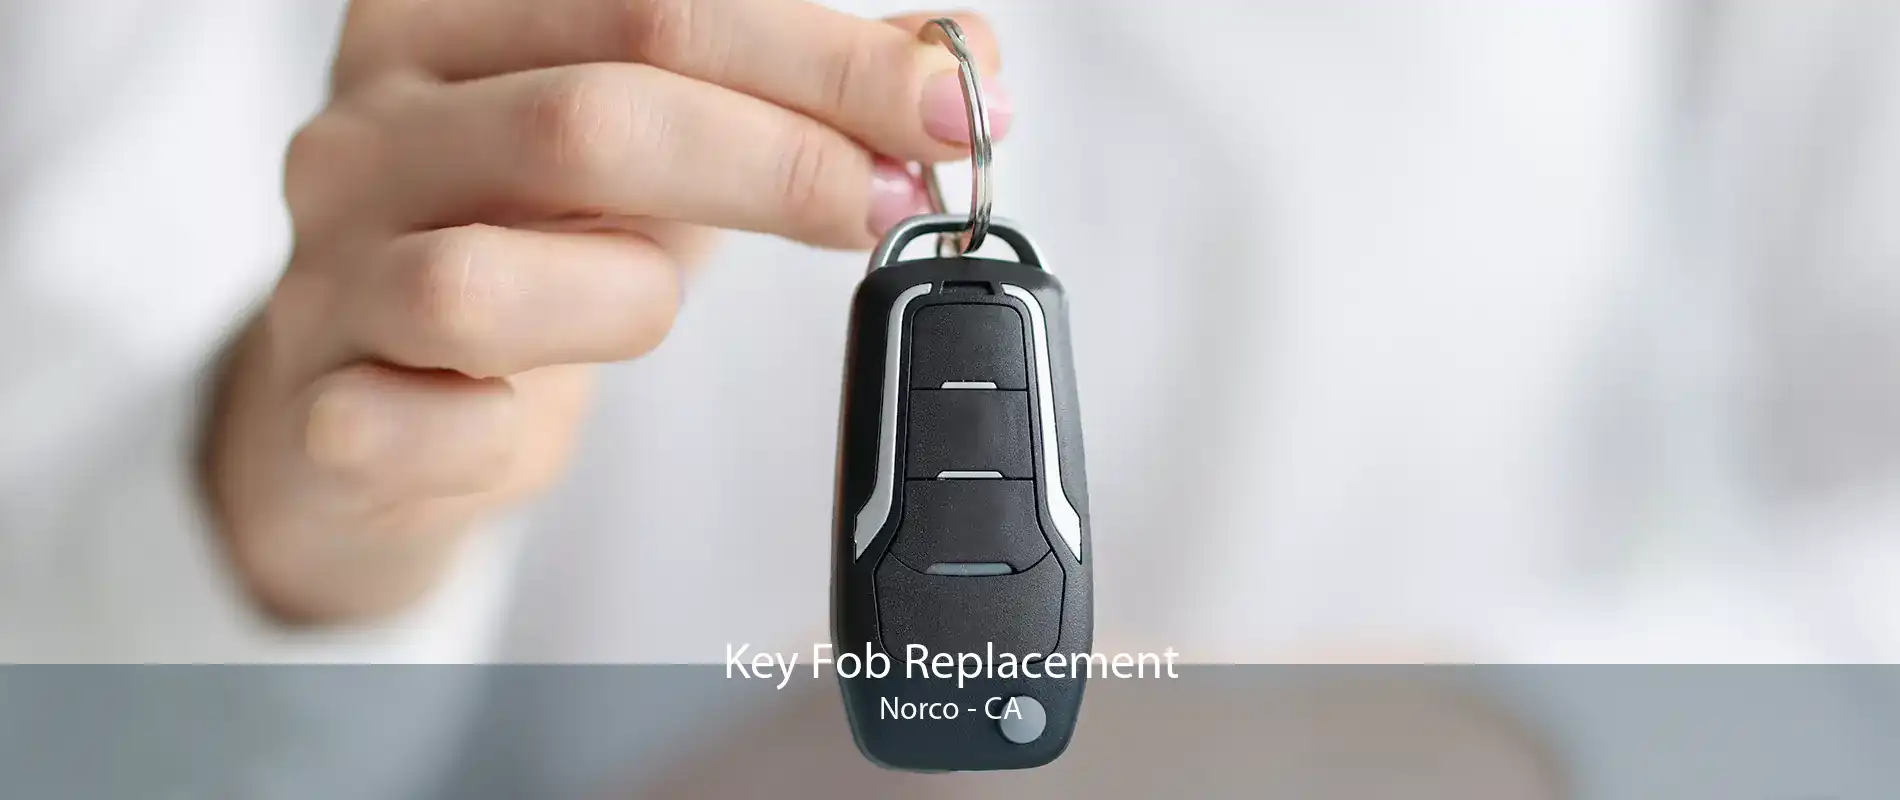 Key Fob Replacement Norco - CA